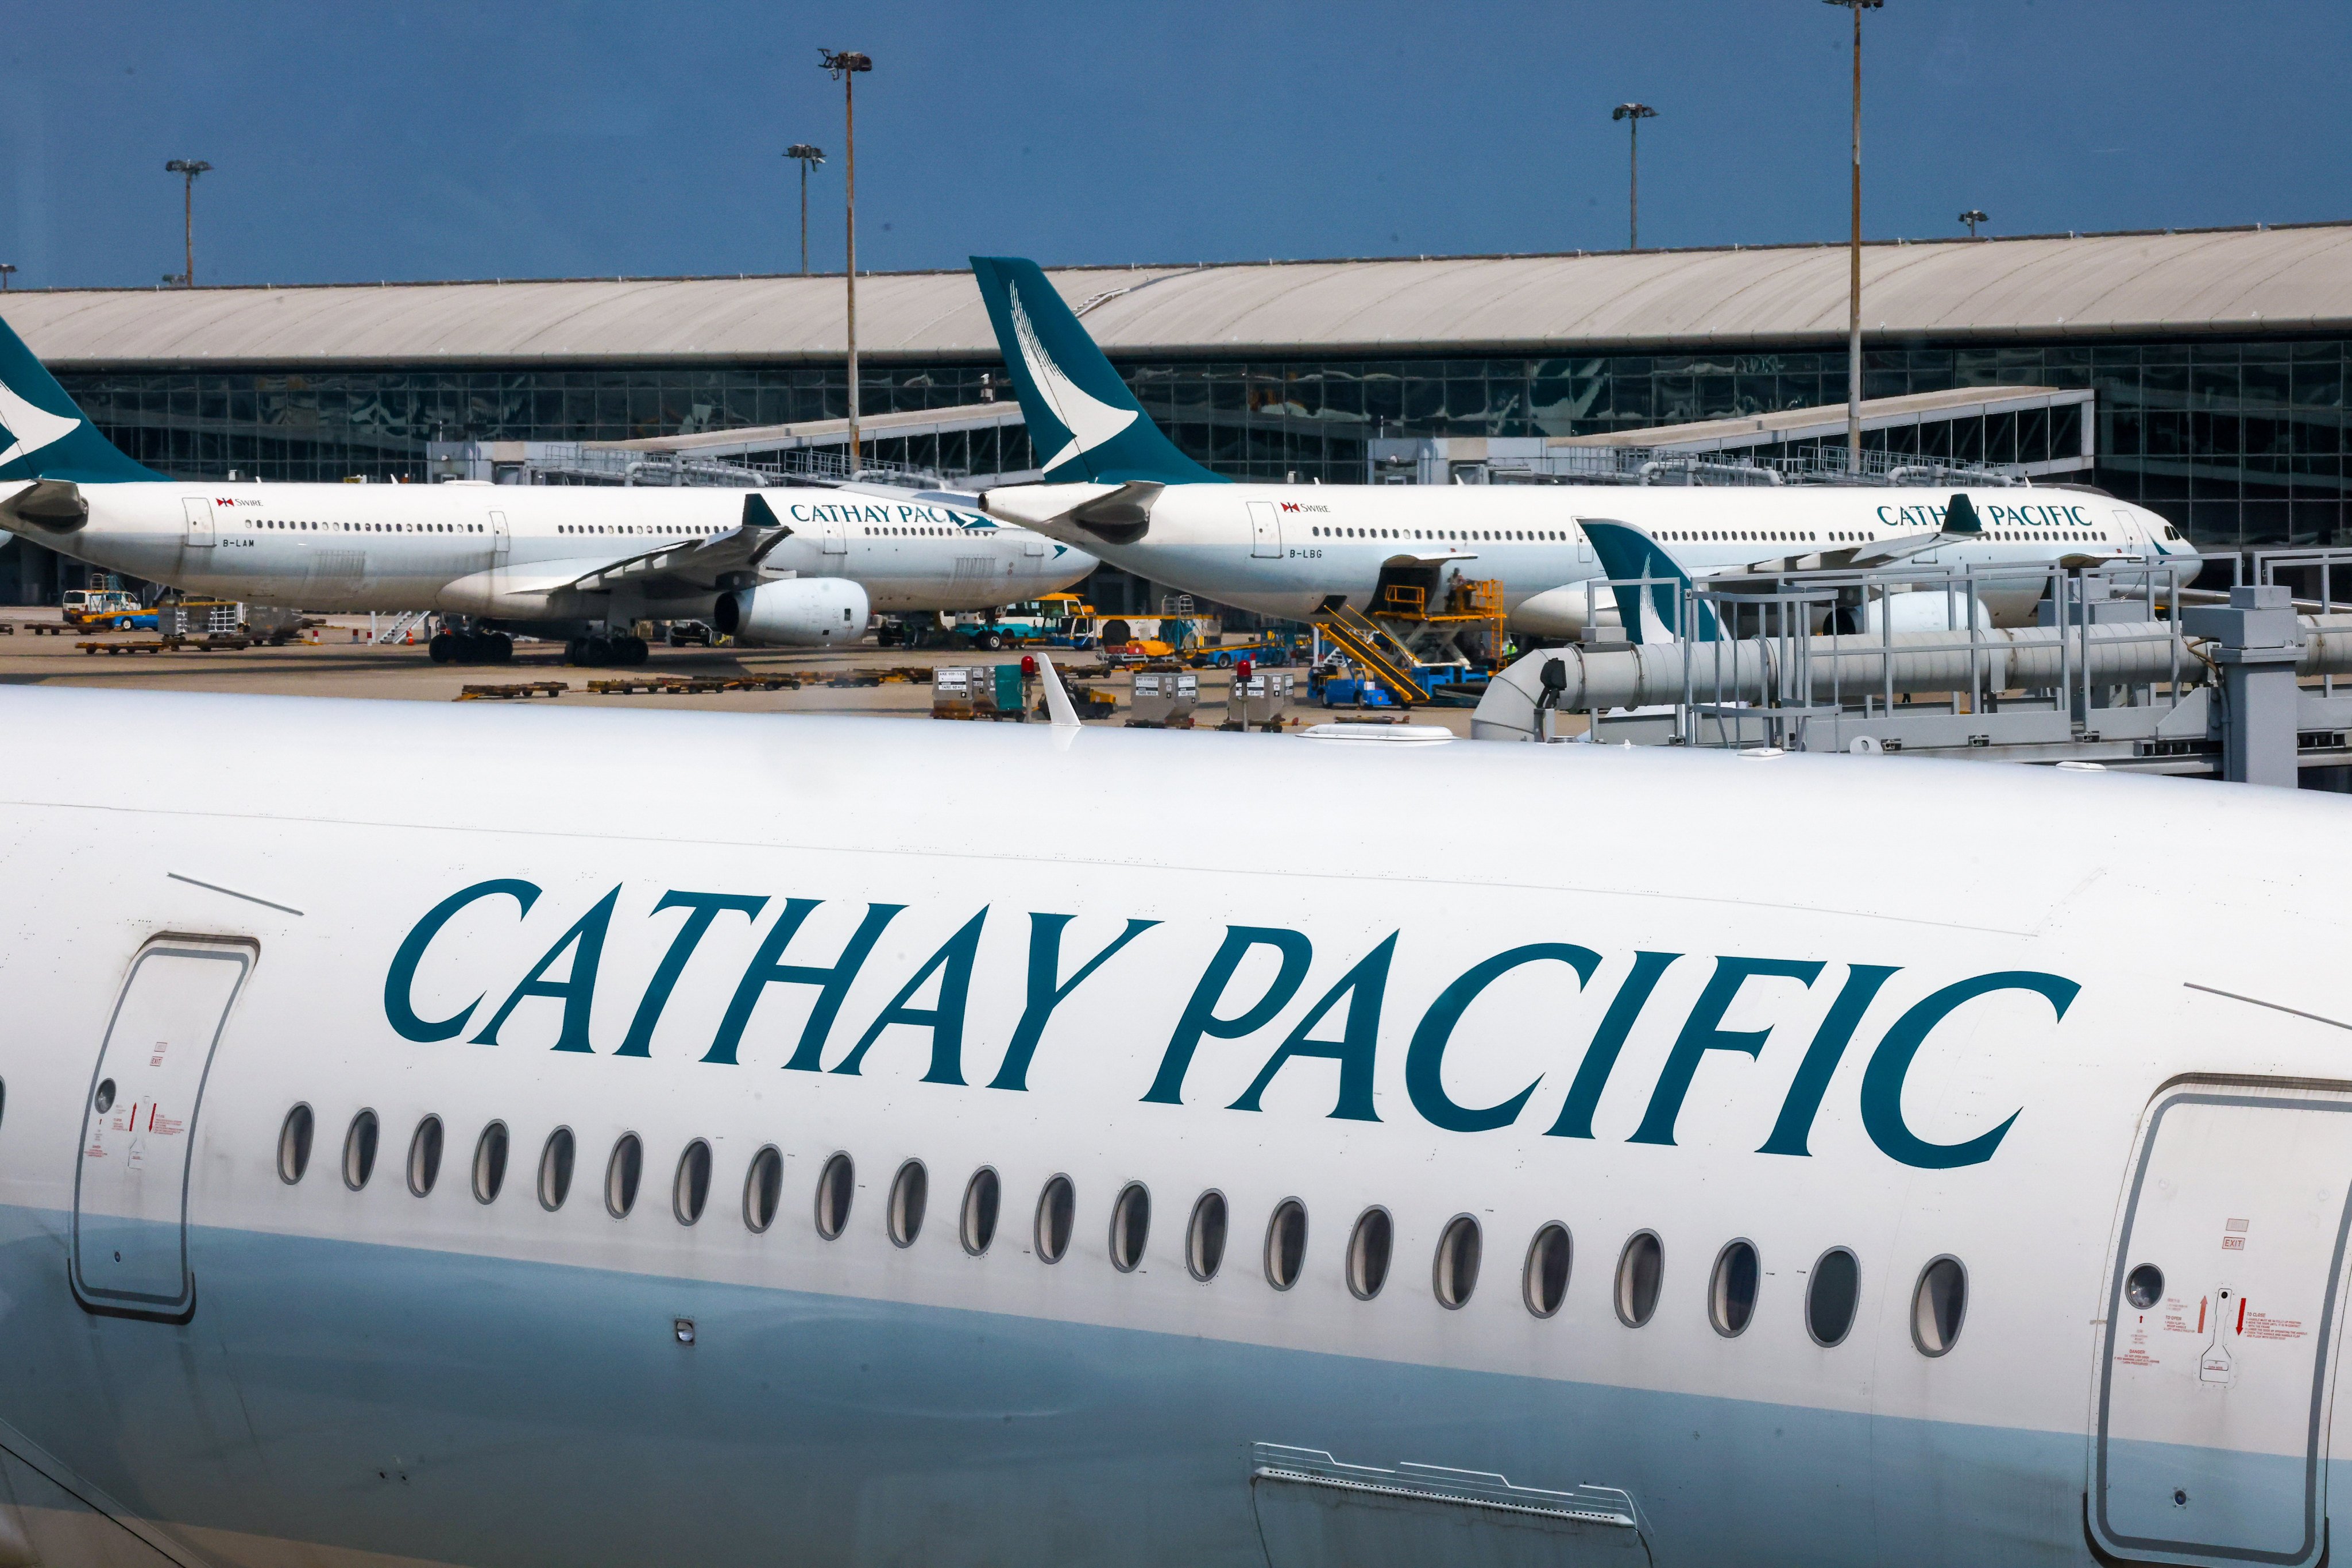 Cathay is struggling to meet expectations as the airline has not been able to deal with a shortfall of pilots, an insider says. Photo: Jonathan Wong